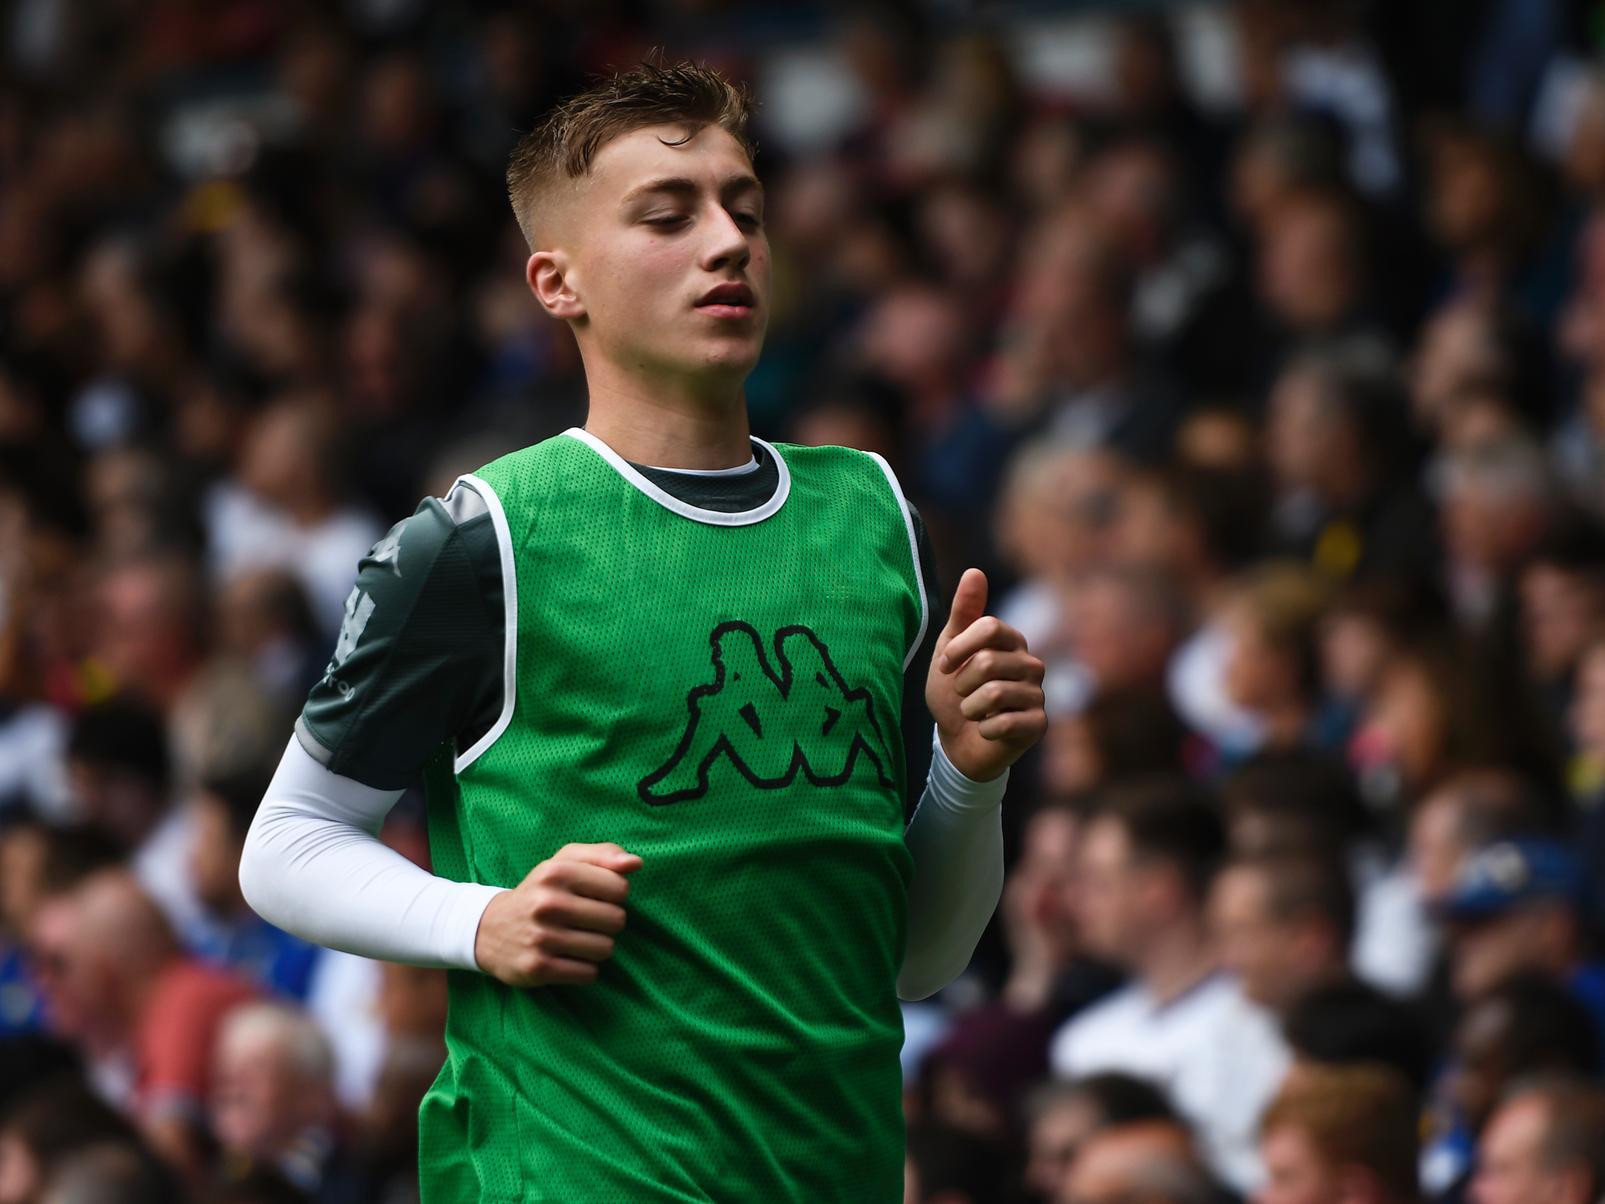 Nottingham Forest are said to have joined Derby County in the race to loan Spurs winger Jack Clarke, who spent the first half of the season with his former club Leeds United. (The 72)